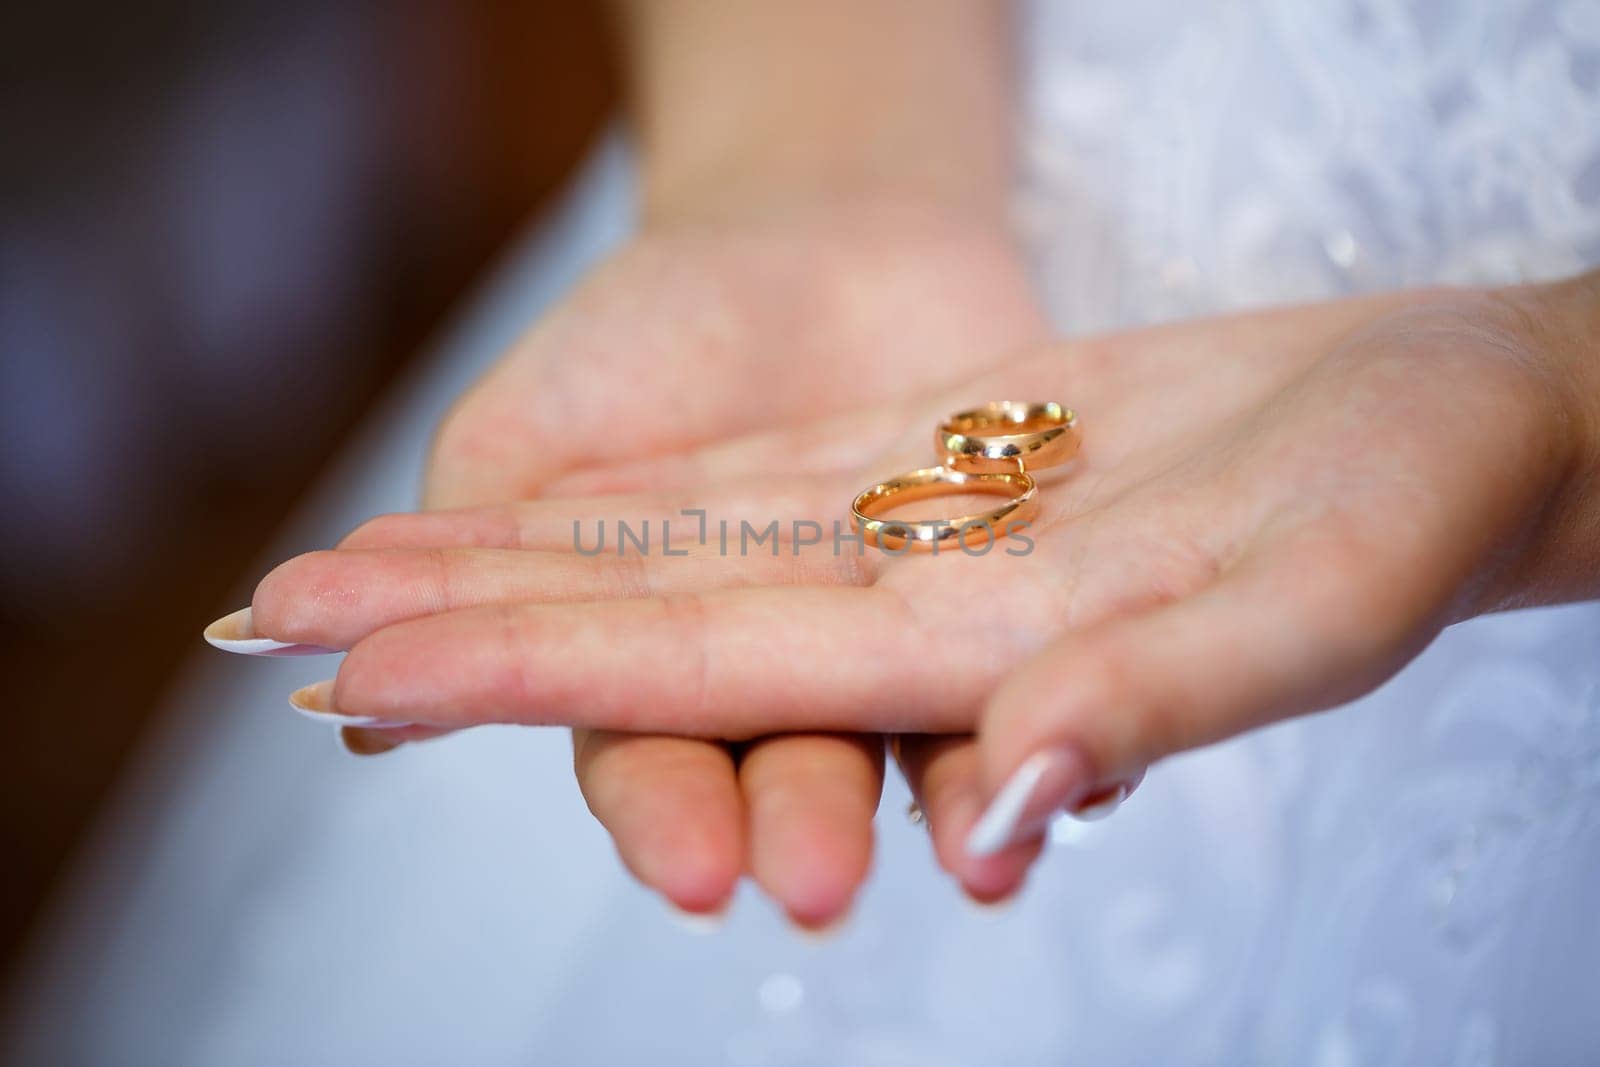 gold wedding rings in hands of newlyweds on wedding day by Dmitrytph